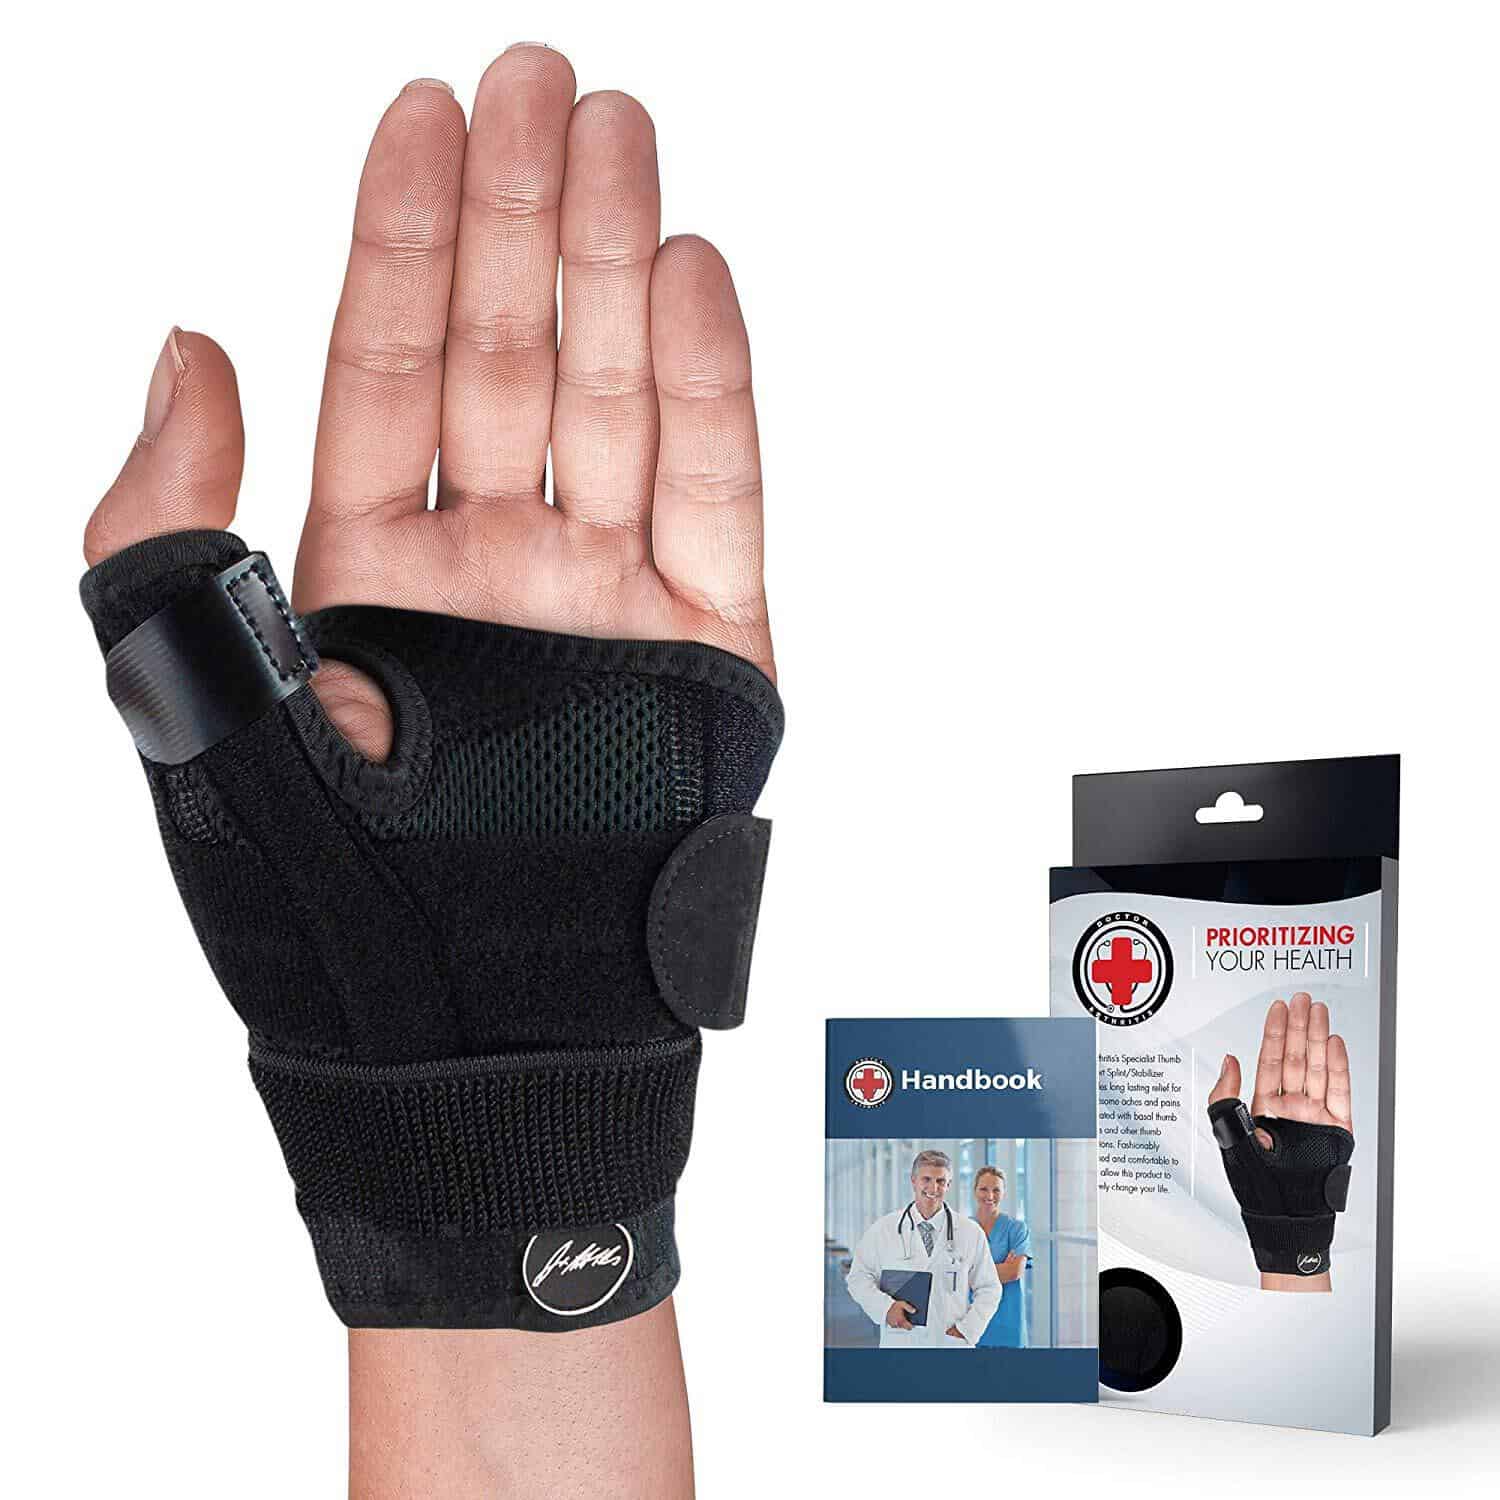 Doctor Developed Premium Carpal Tunnel Night Wrist Brace & Support [single]  (With Splint) & Doctor Written Handbook - Fully Adjustable With Comfort